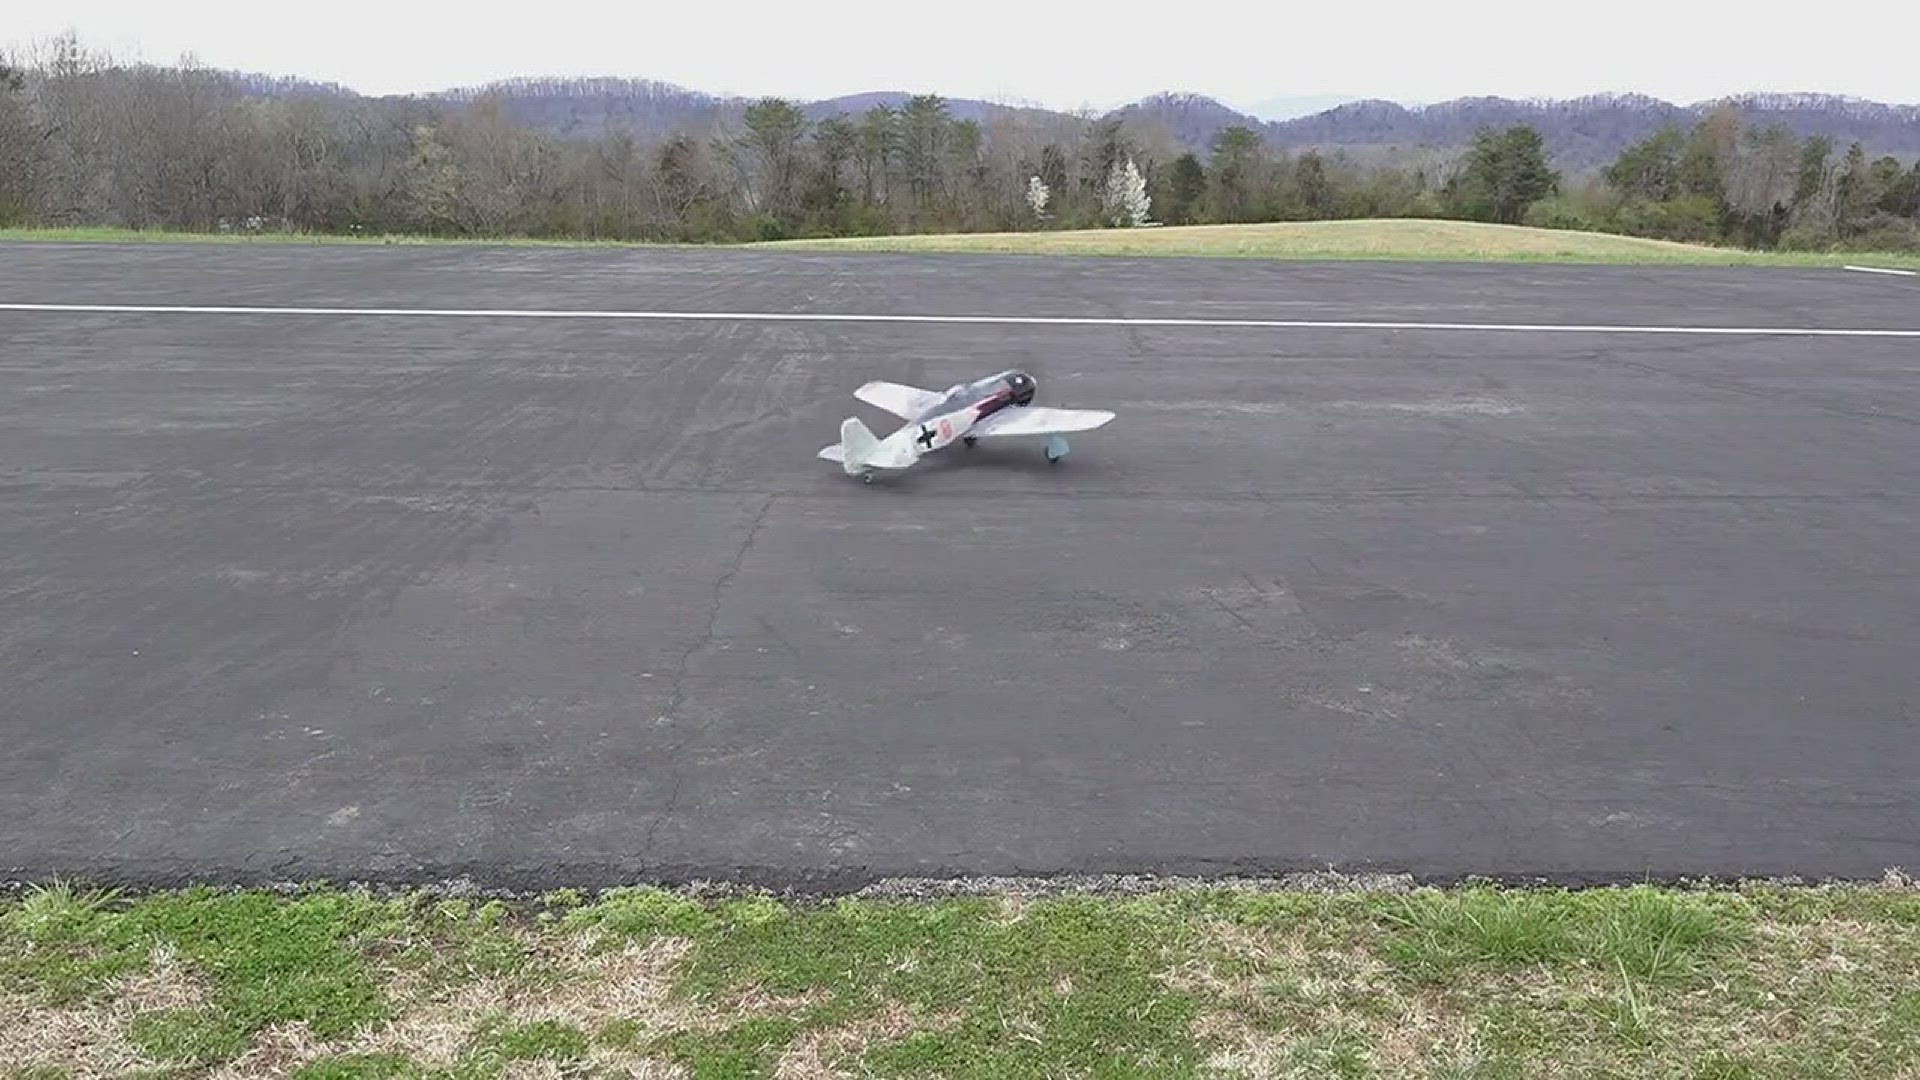 March 13, 2018: As development grows in West Knox County, officials say it's going to be more difficult to develop parks in the area. That is affecting the Knox County Radio Control Society, which flies model airplanes on a piece of land in Melton Hill Pa